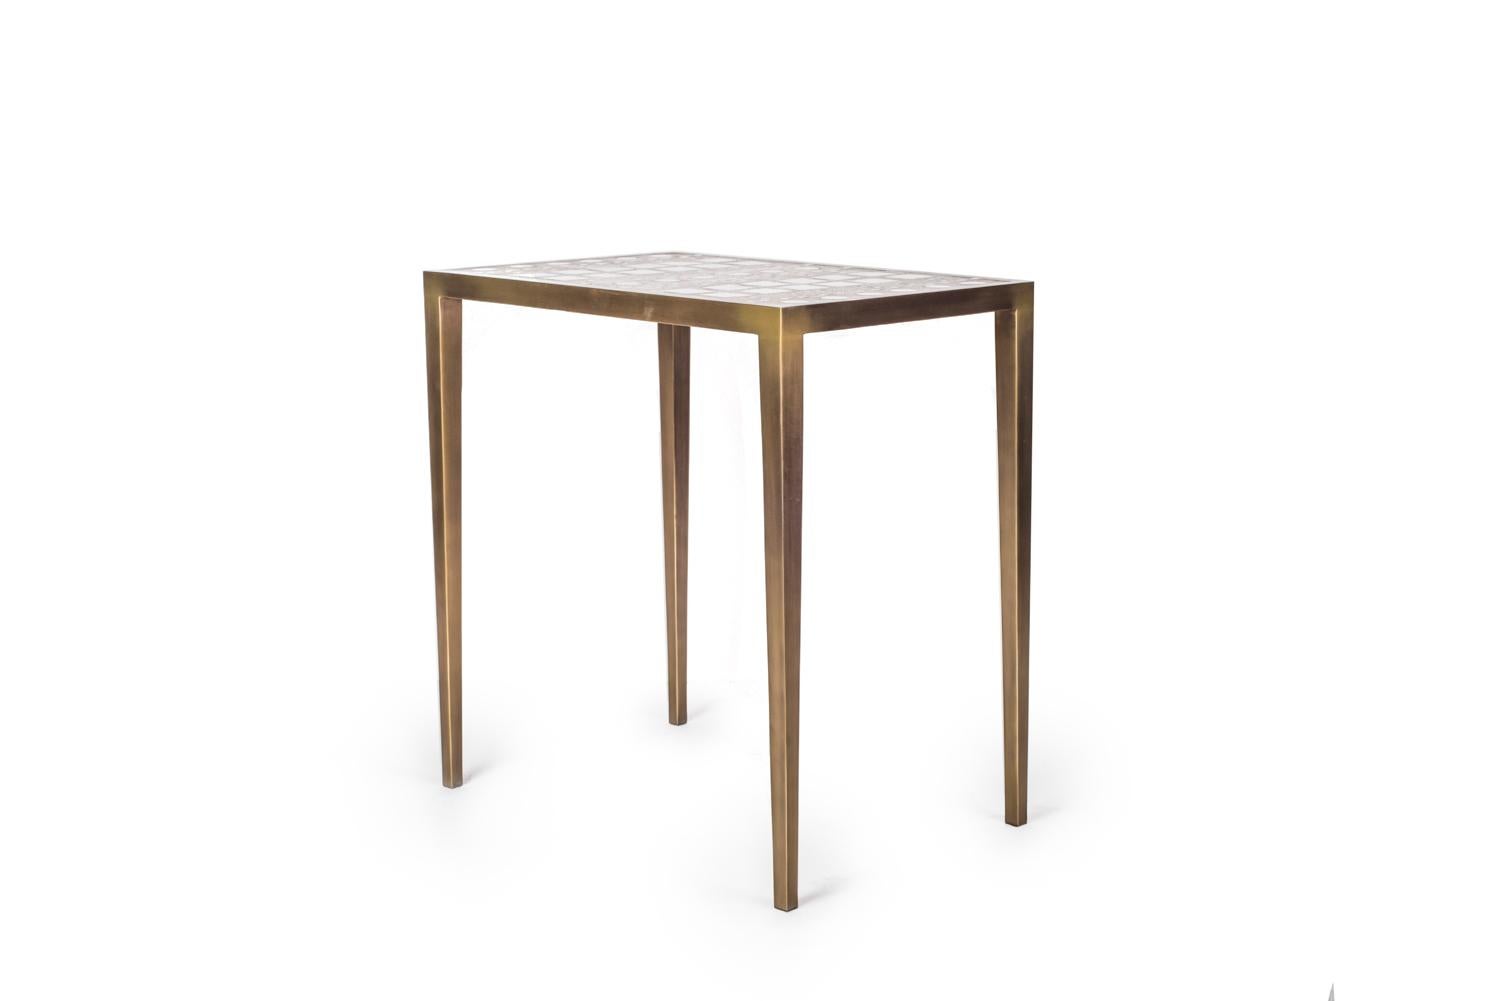 The mix media nesting side table in medium is part of a series of nesting side tables (sold separately). One can purchase the tables on their own or buy them as a set to create elegant and geometric shapes. This piece demonstrates the incredible